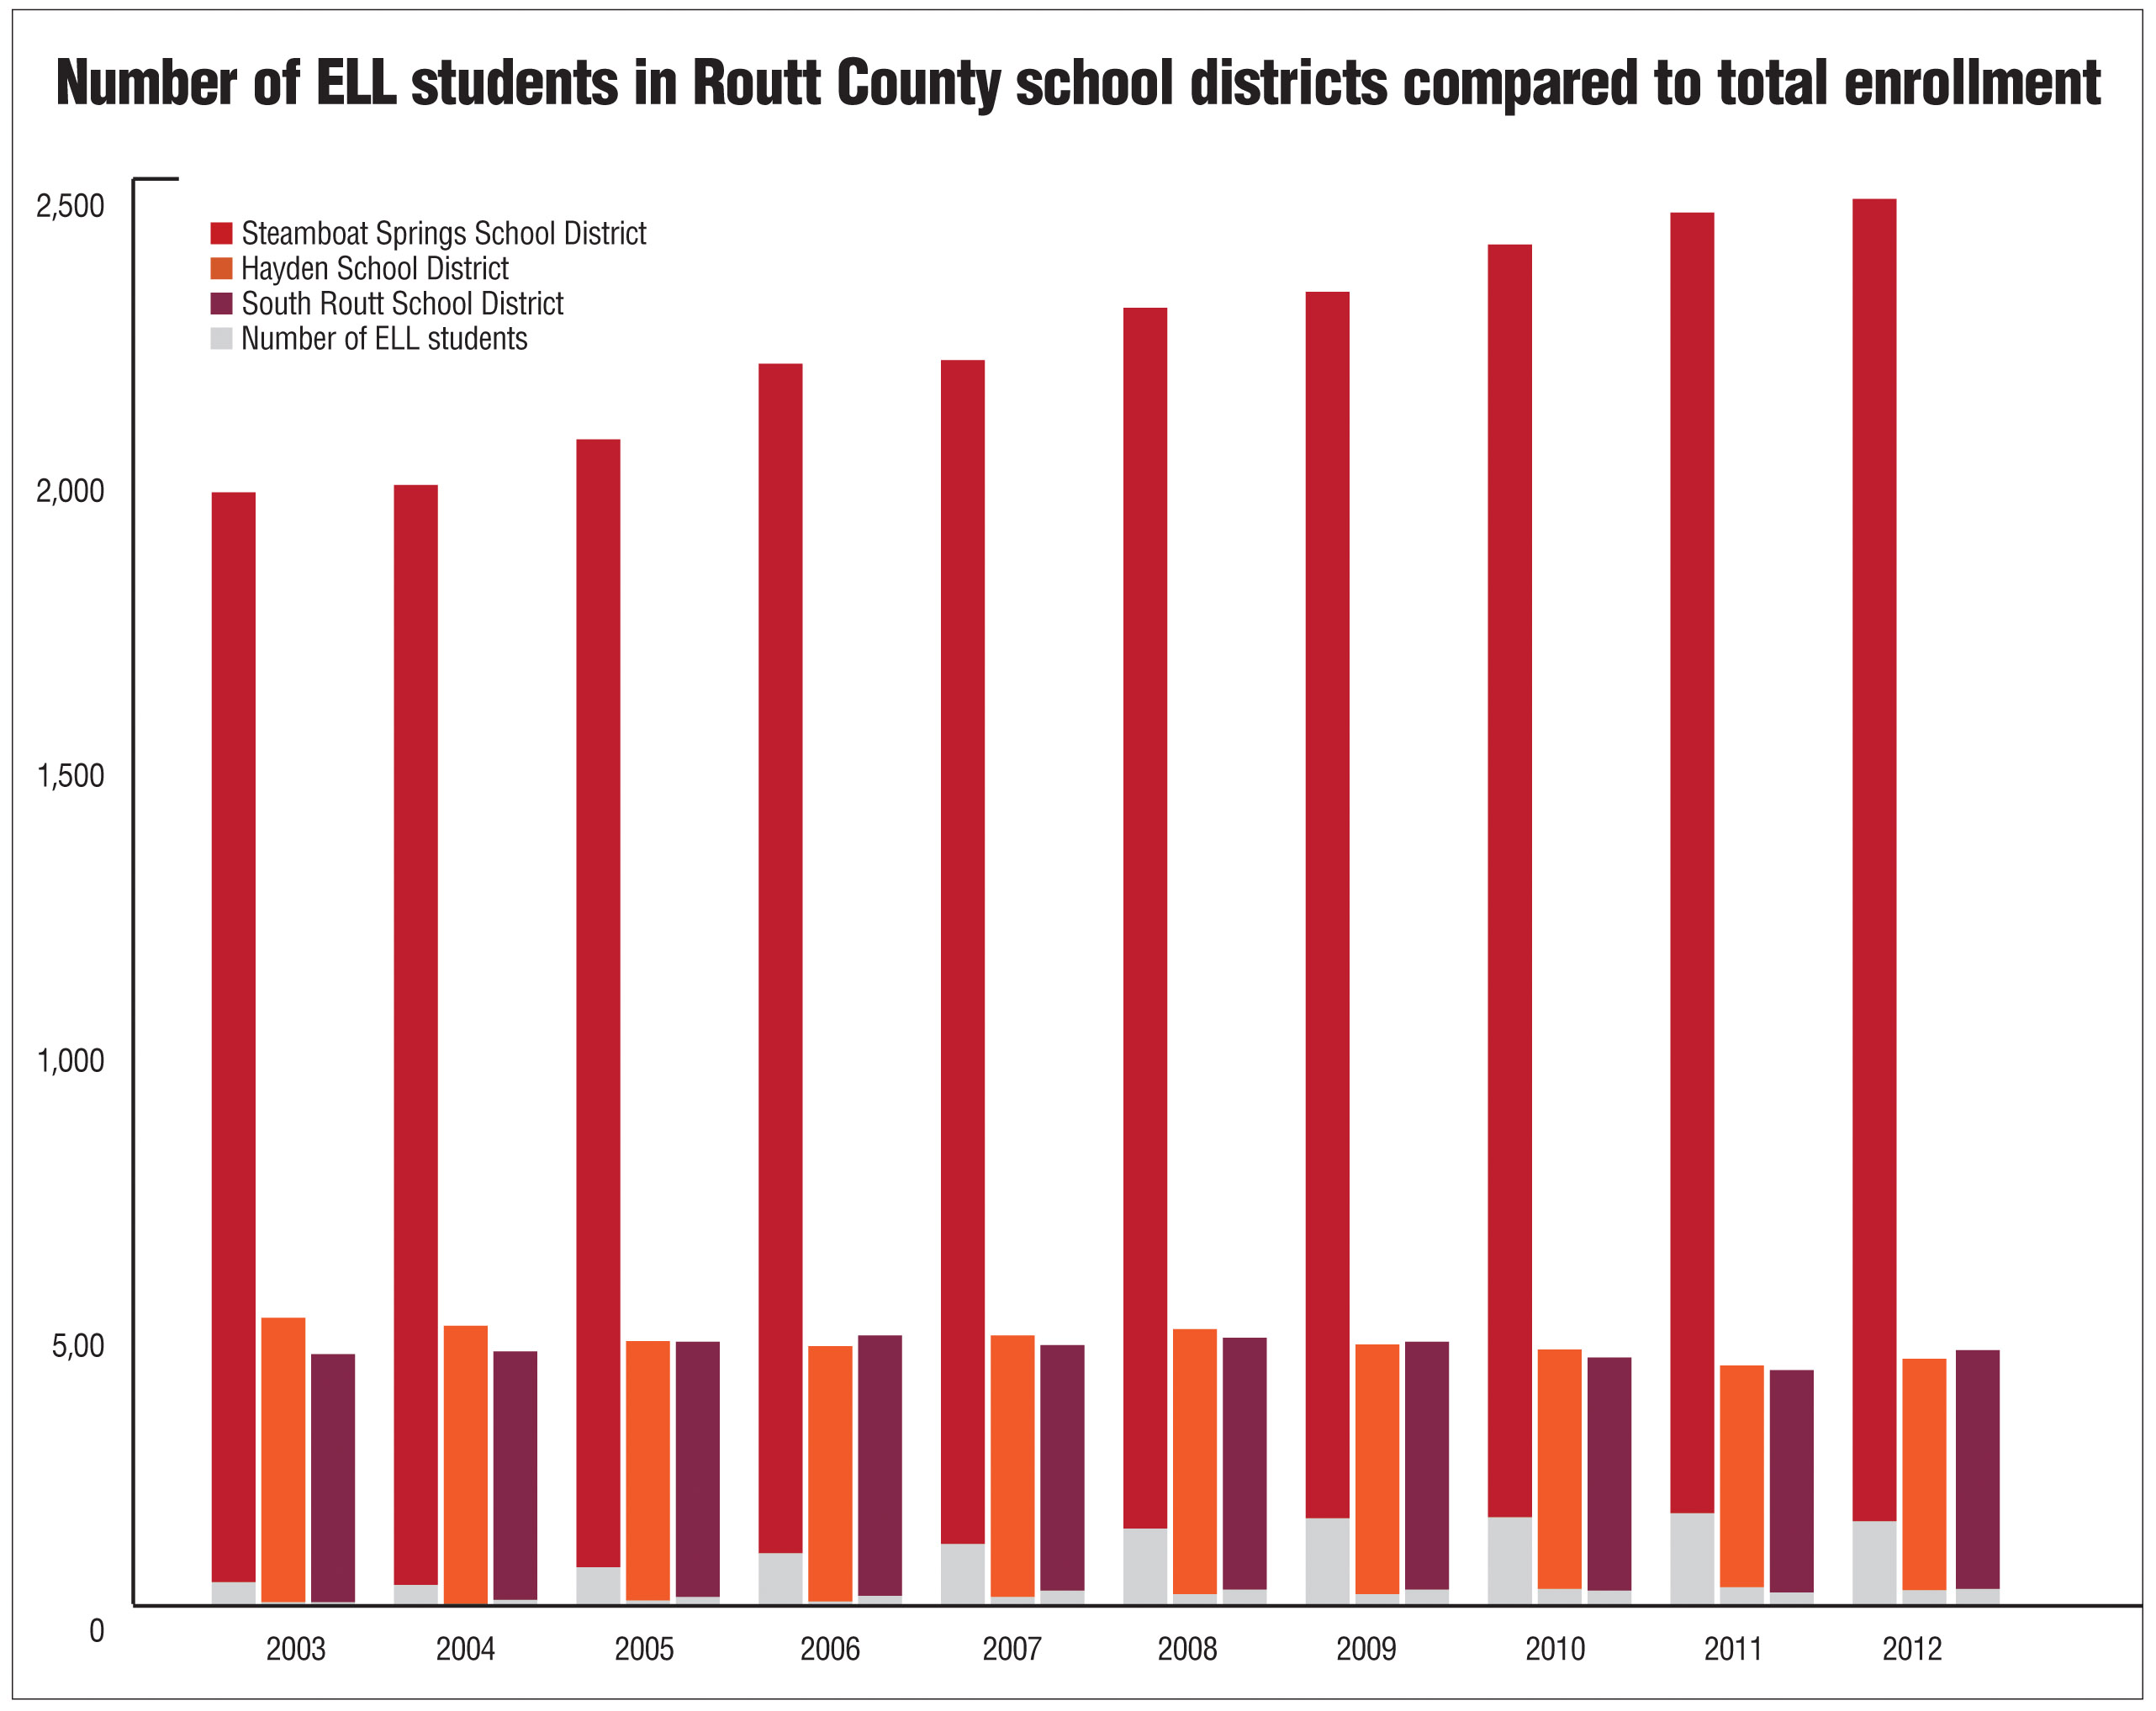 derry township school district number of ell student